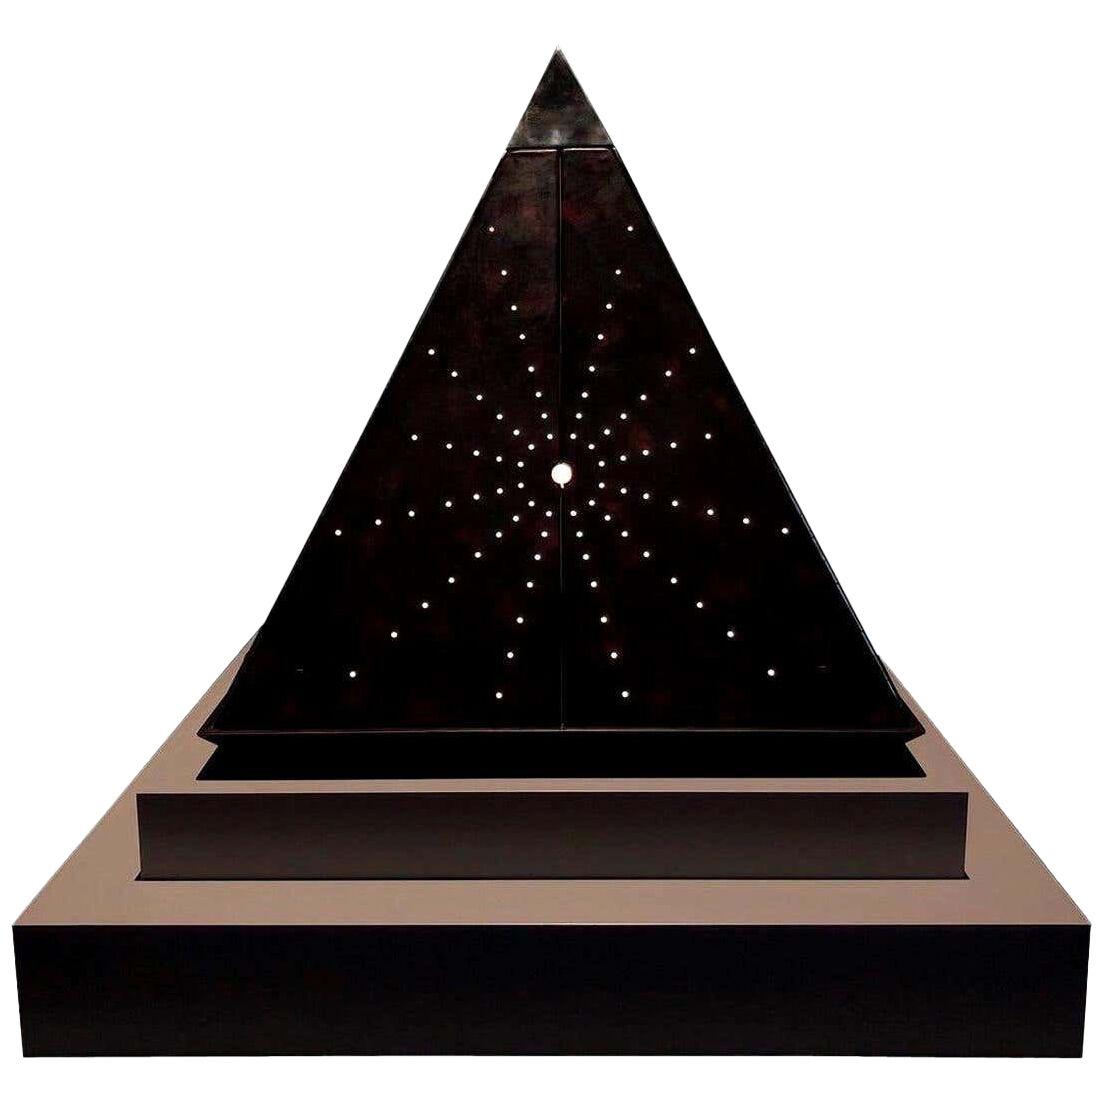 Oscar Tusquets Contemporary Leather Starry Pyramid Limited Edition